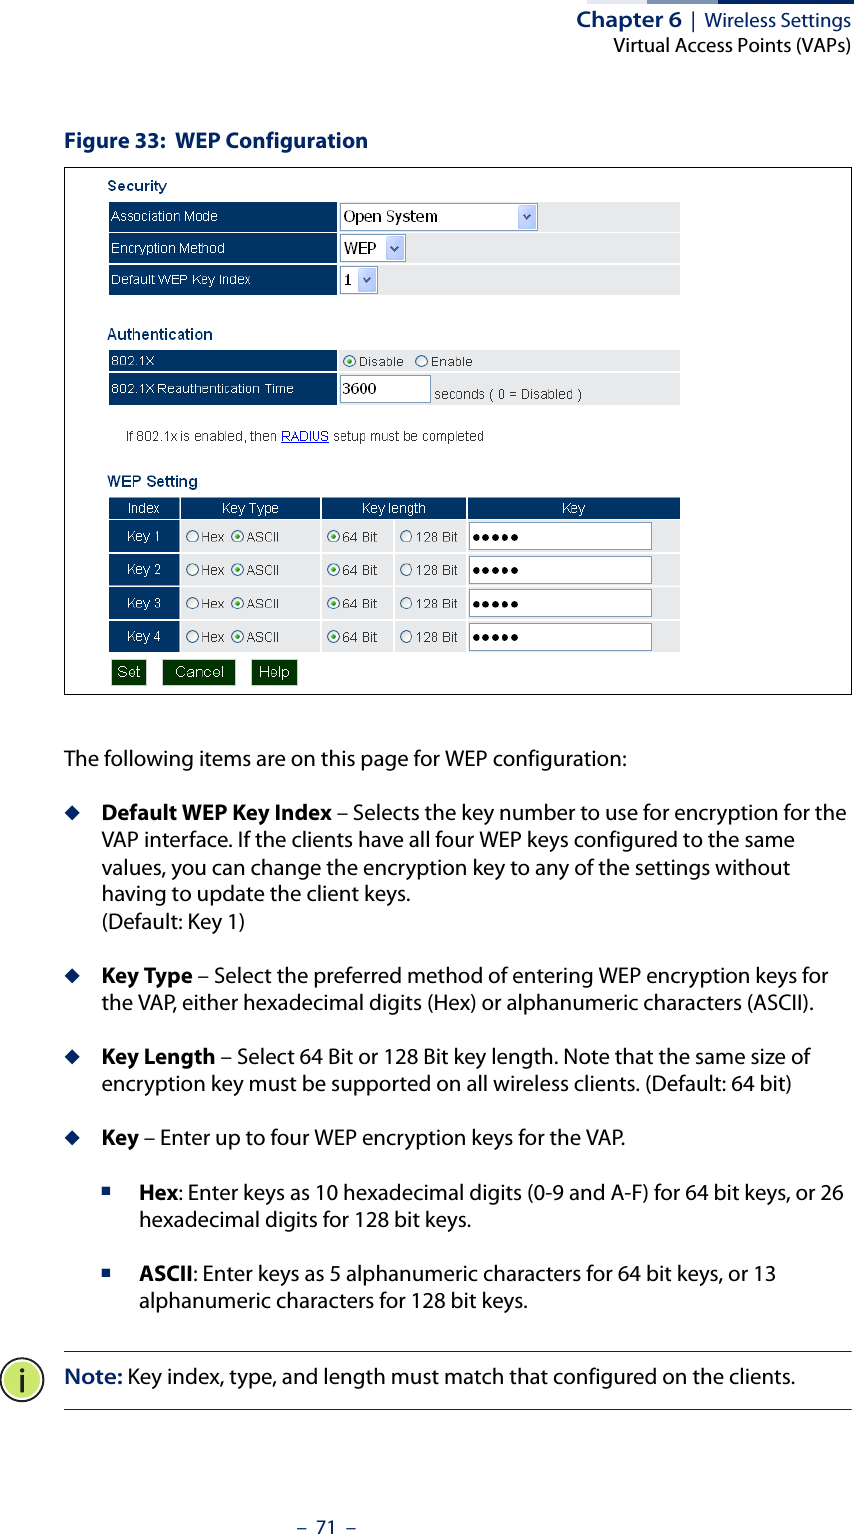 Chapter 6  |  Wireless SettingsVirtual Access Points (VAPs)–  71  –Figure 33:  WEP ConfigurationThe following items are on this page for WEP configuration:◆Default WEP Key Index – Selects the key number to use for encryption for the VAP interface. If the clients have all four WEP keys configured to the same values, you can change the encryption key to any of the settings without having to update the client keys. (Default: Key 1)◆Key Type – Select the preferred method of entering WEP encryption keys for the VAP, either hexadecimal digits (Hex) or alphanumeric characters (ASCII).◆Key Length – Select 64 Bit or 128 Bit key length. Note that the same size of encryption key must be supported on all wireless clients. (Default: 64 bit)◆Key – Enter up to four WEP encryption keys for the VAP.■Hex: Enter keys as 10 hexadecimal digits (0-9 and A-F) for 64 bit keys, or 26 hexadecimal digits for 128 bit keys.■ASCII: Enter keys as 5 alphanumeric characters for 64 bit keys, or 13 alphanumeric characters for 128 bit keys.Note: Key index, type, and length must match that configured on the clients.